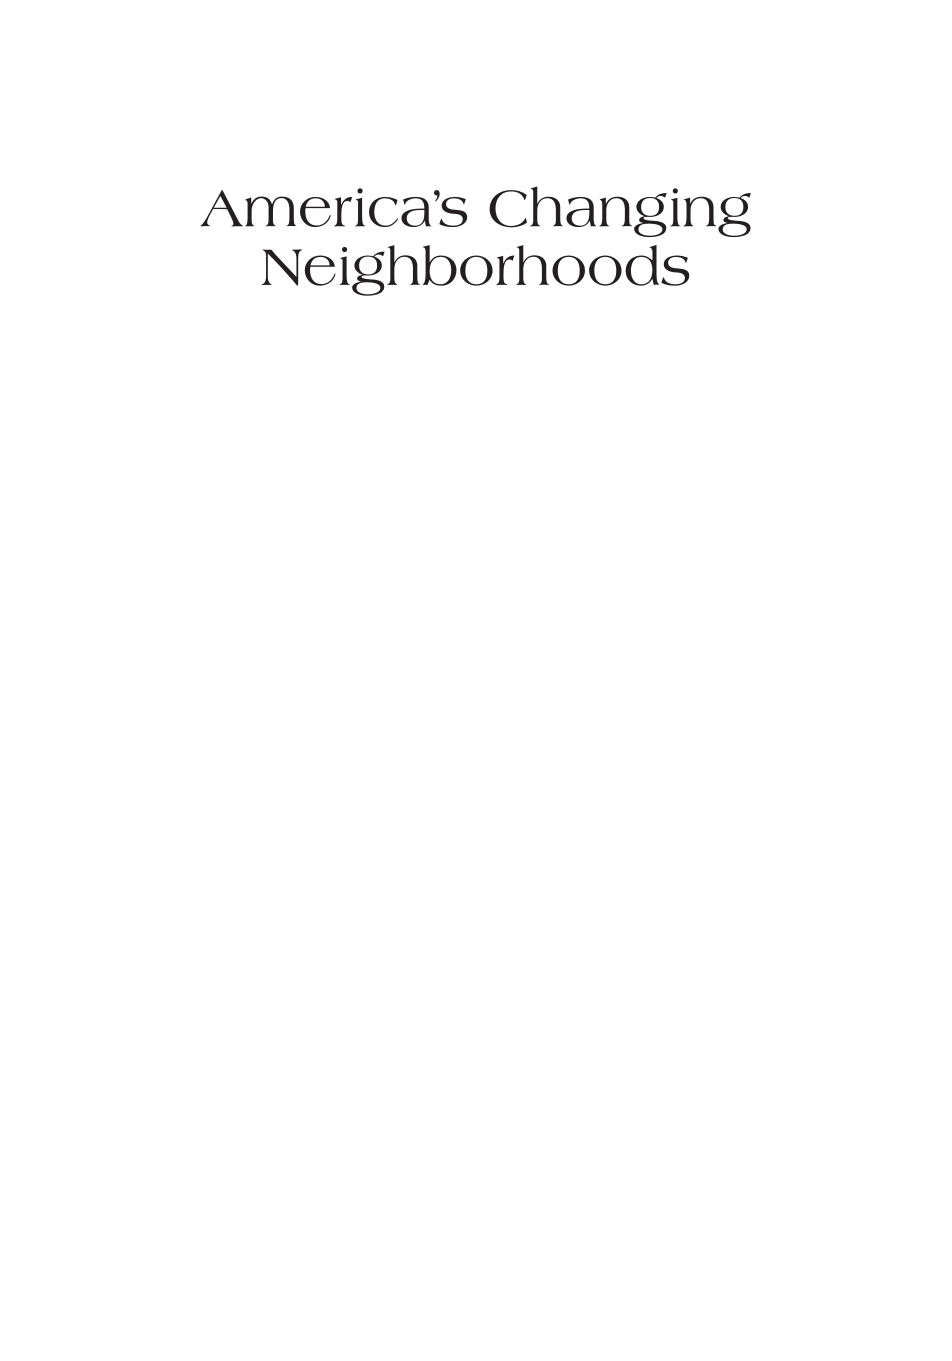 America's Changing Neighborhoods: An Exploration of Diversity through Places [3 volumes] page i